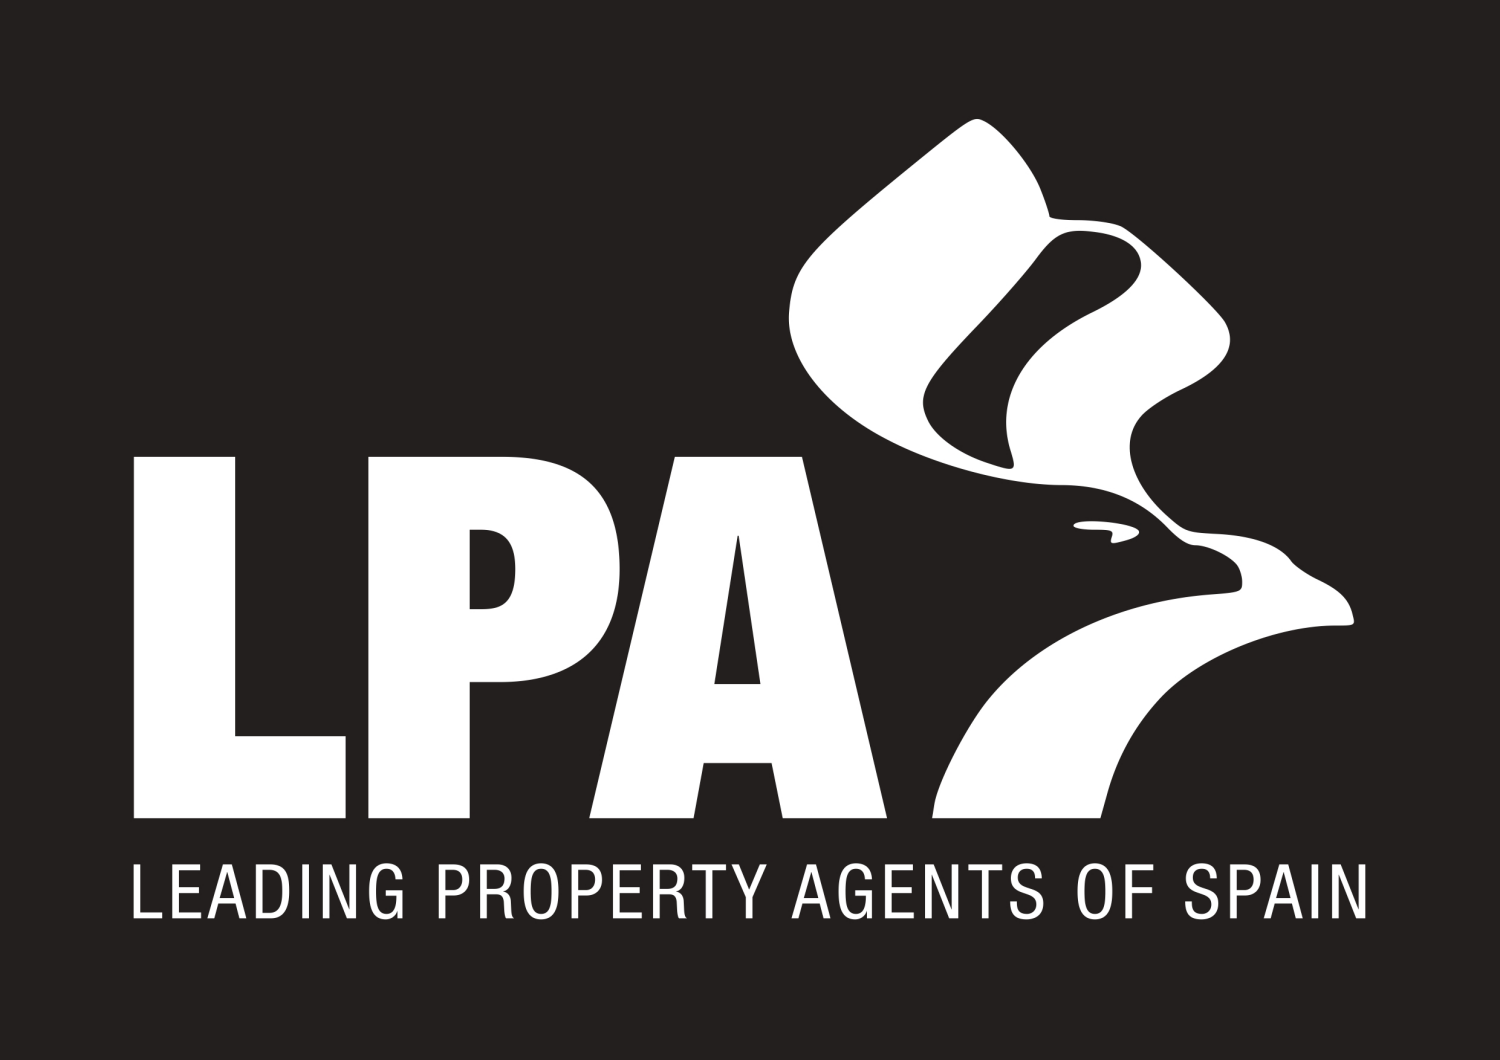 Members of the LPA - Leading Property Agents of Spain